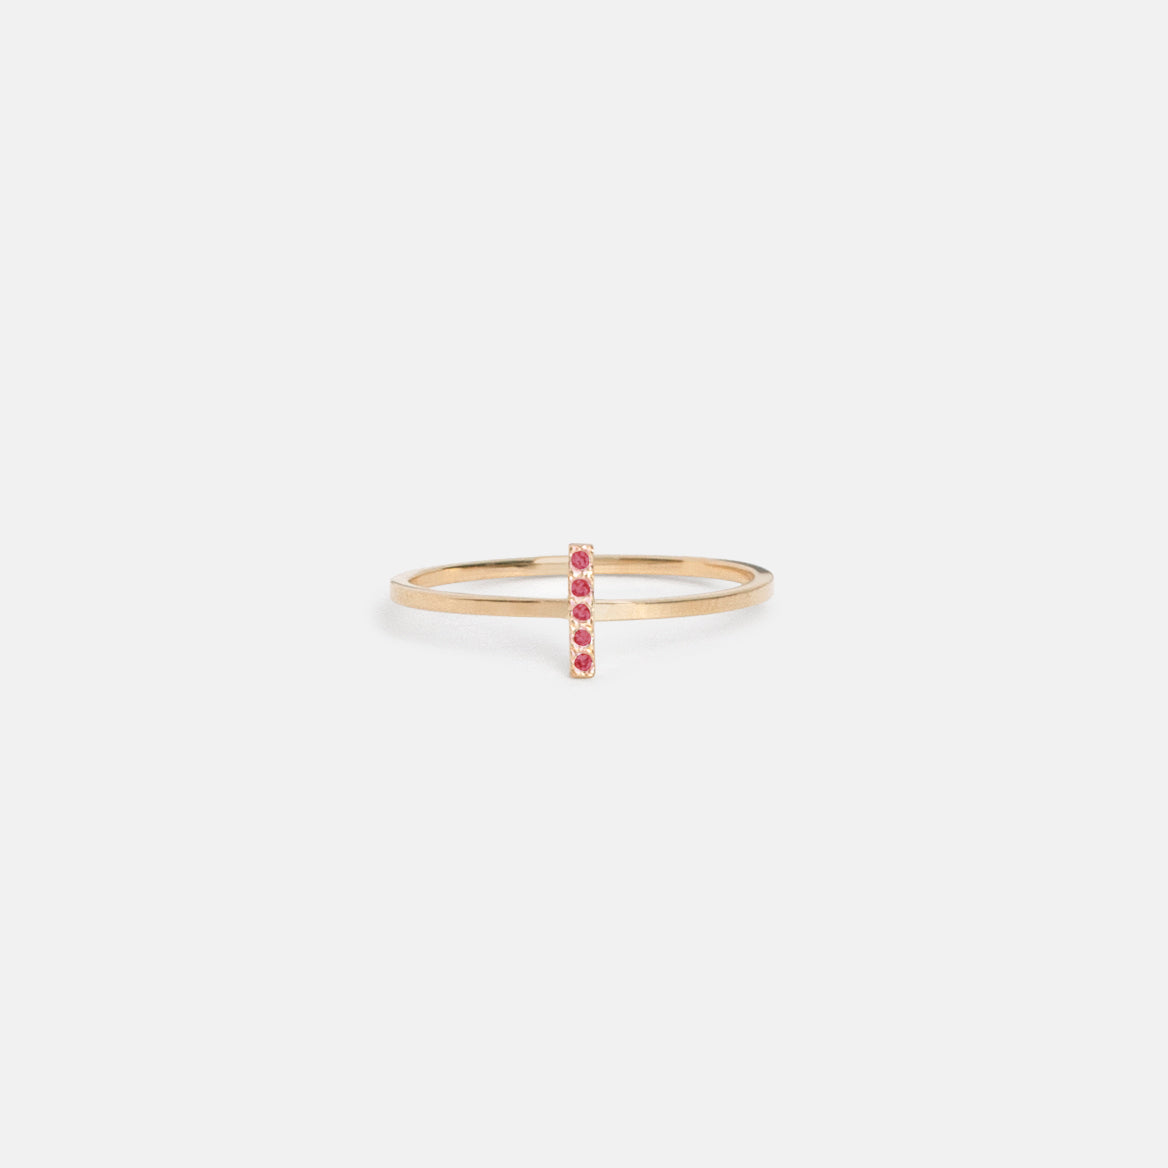 Stevi Thin Ring in 14k Gold set with Rubies by SHW Fine Jewelry